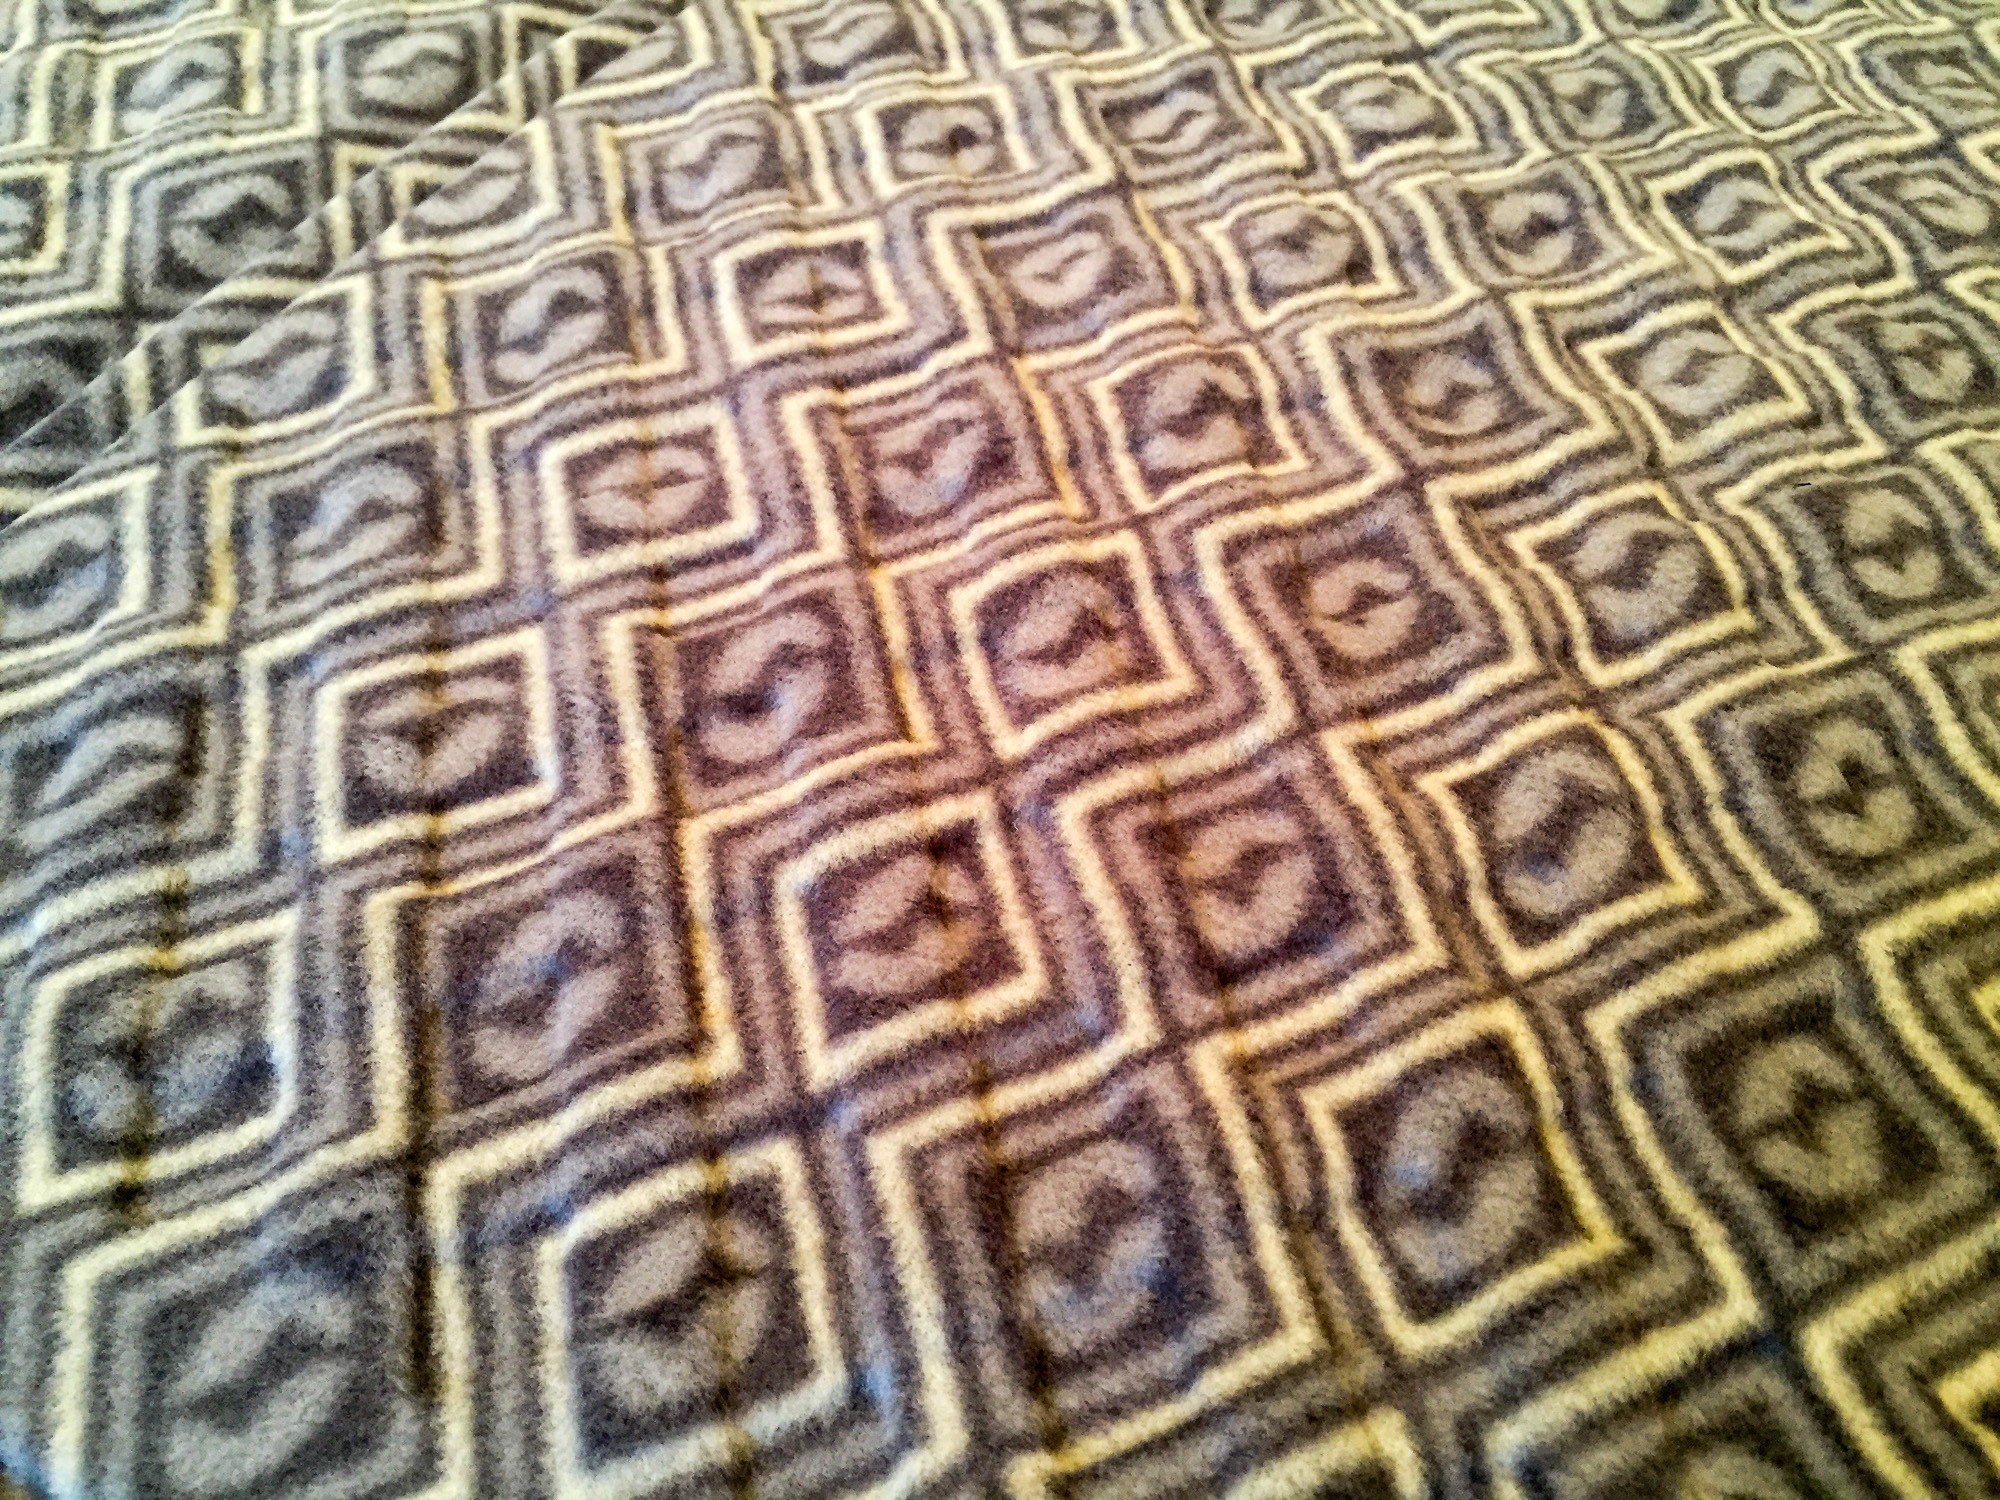 View of the tent carpet up close